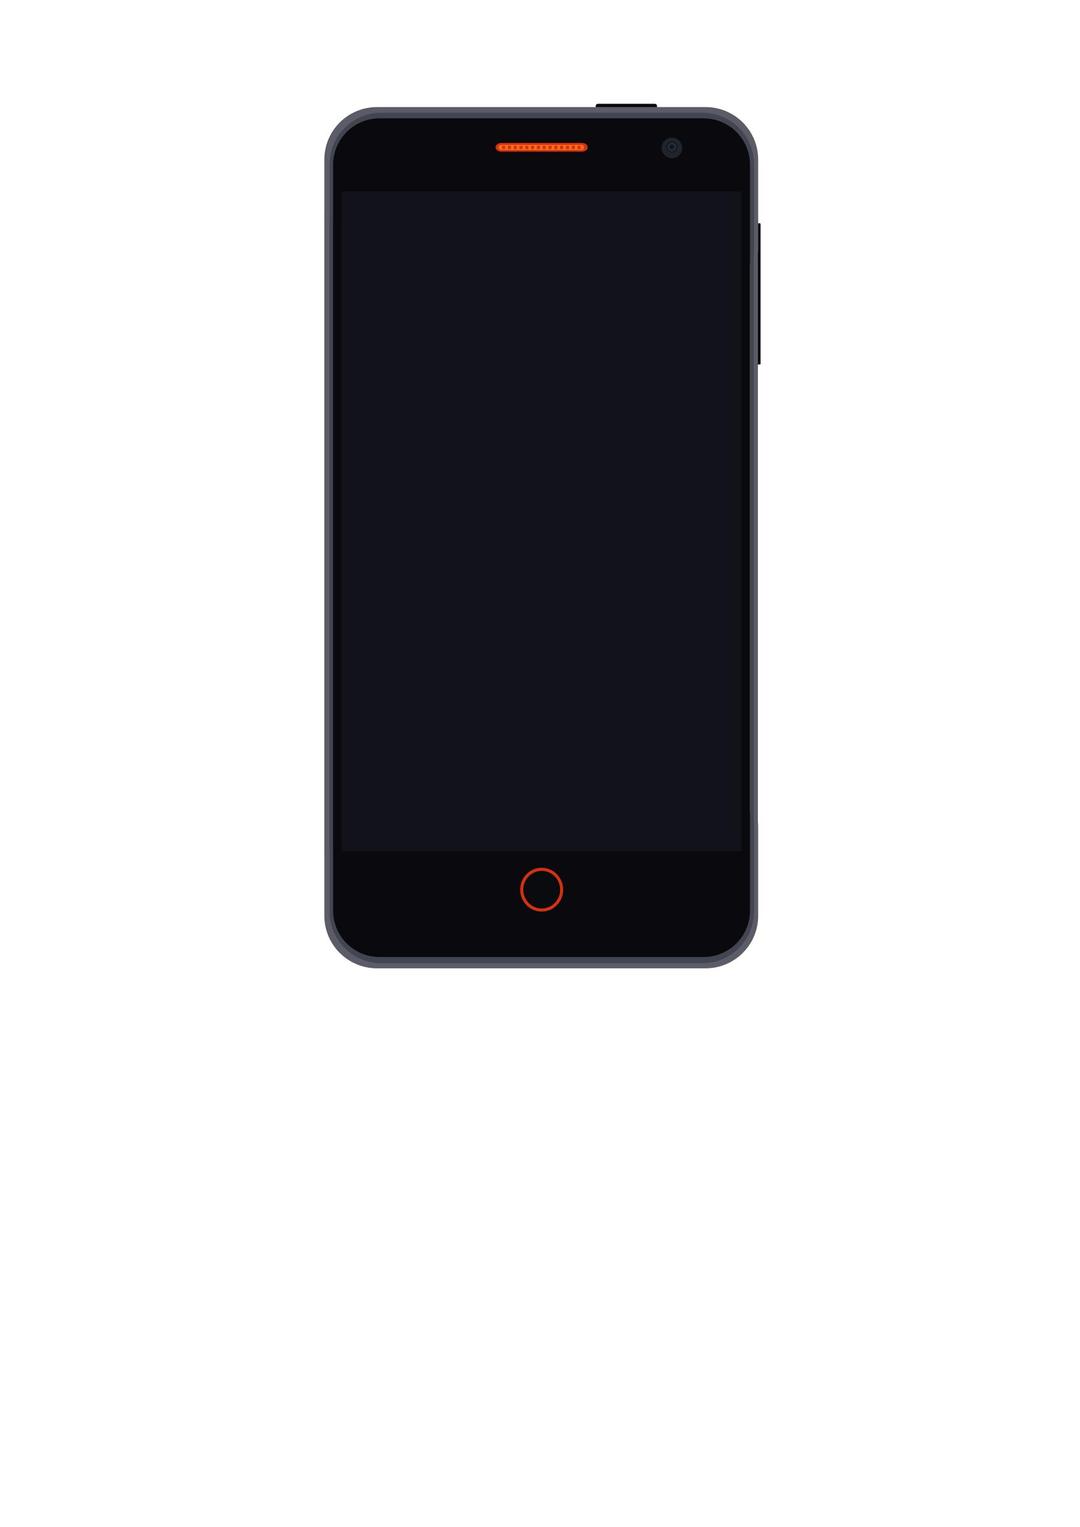 Firefox flame phone vector png transparent